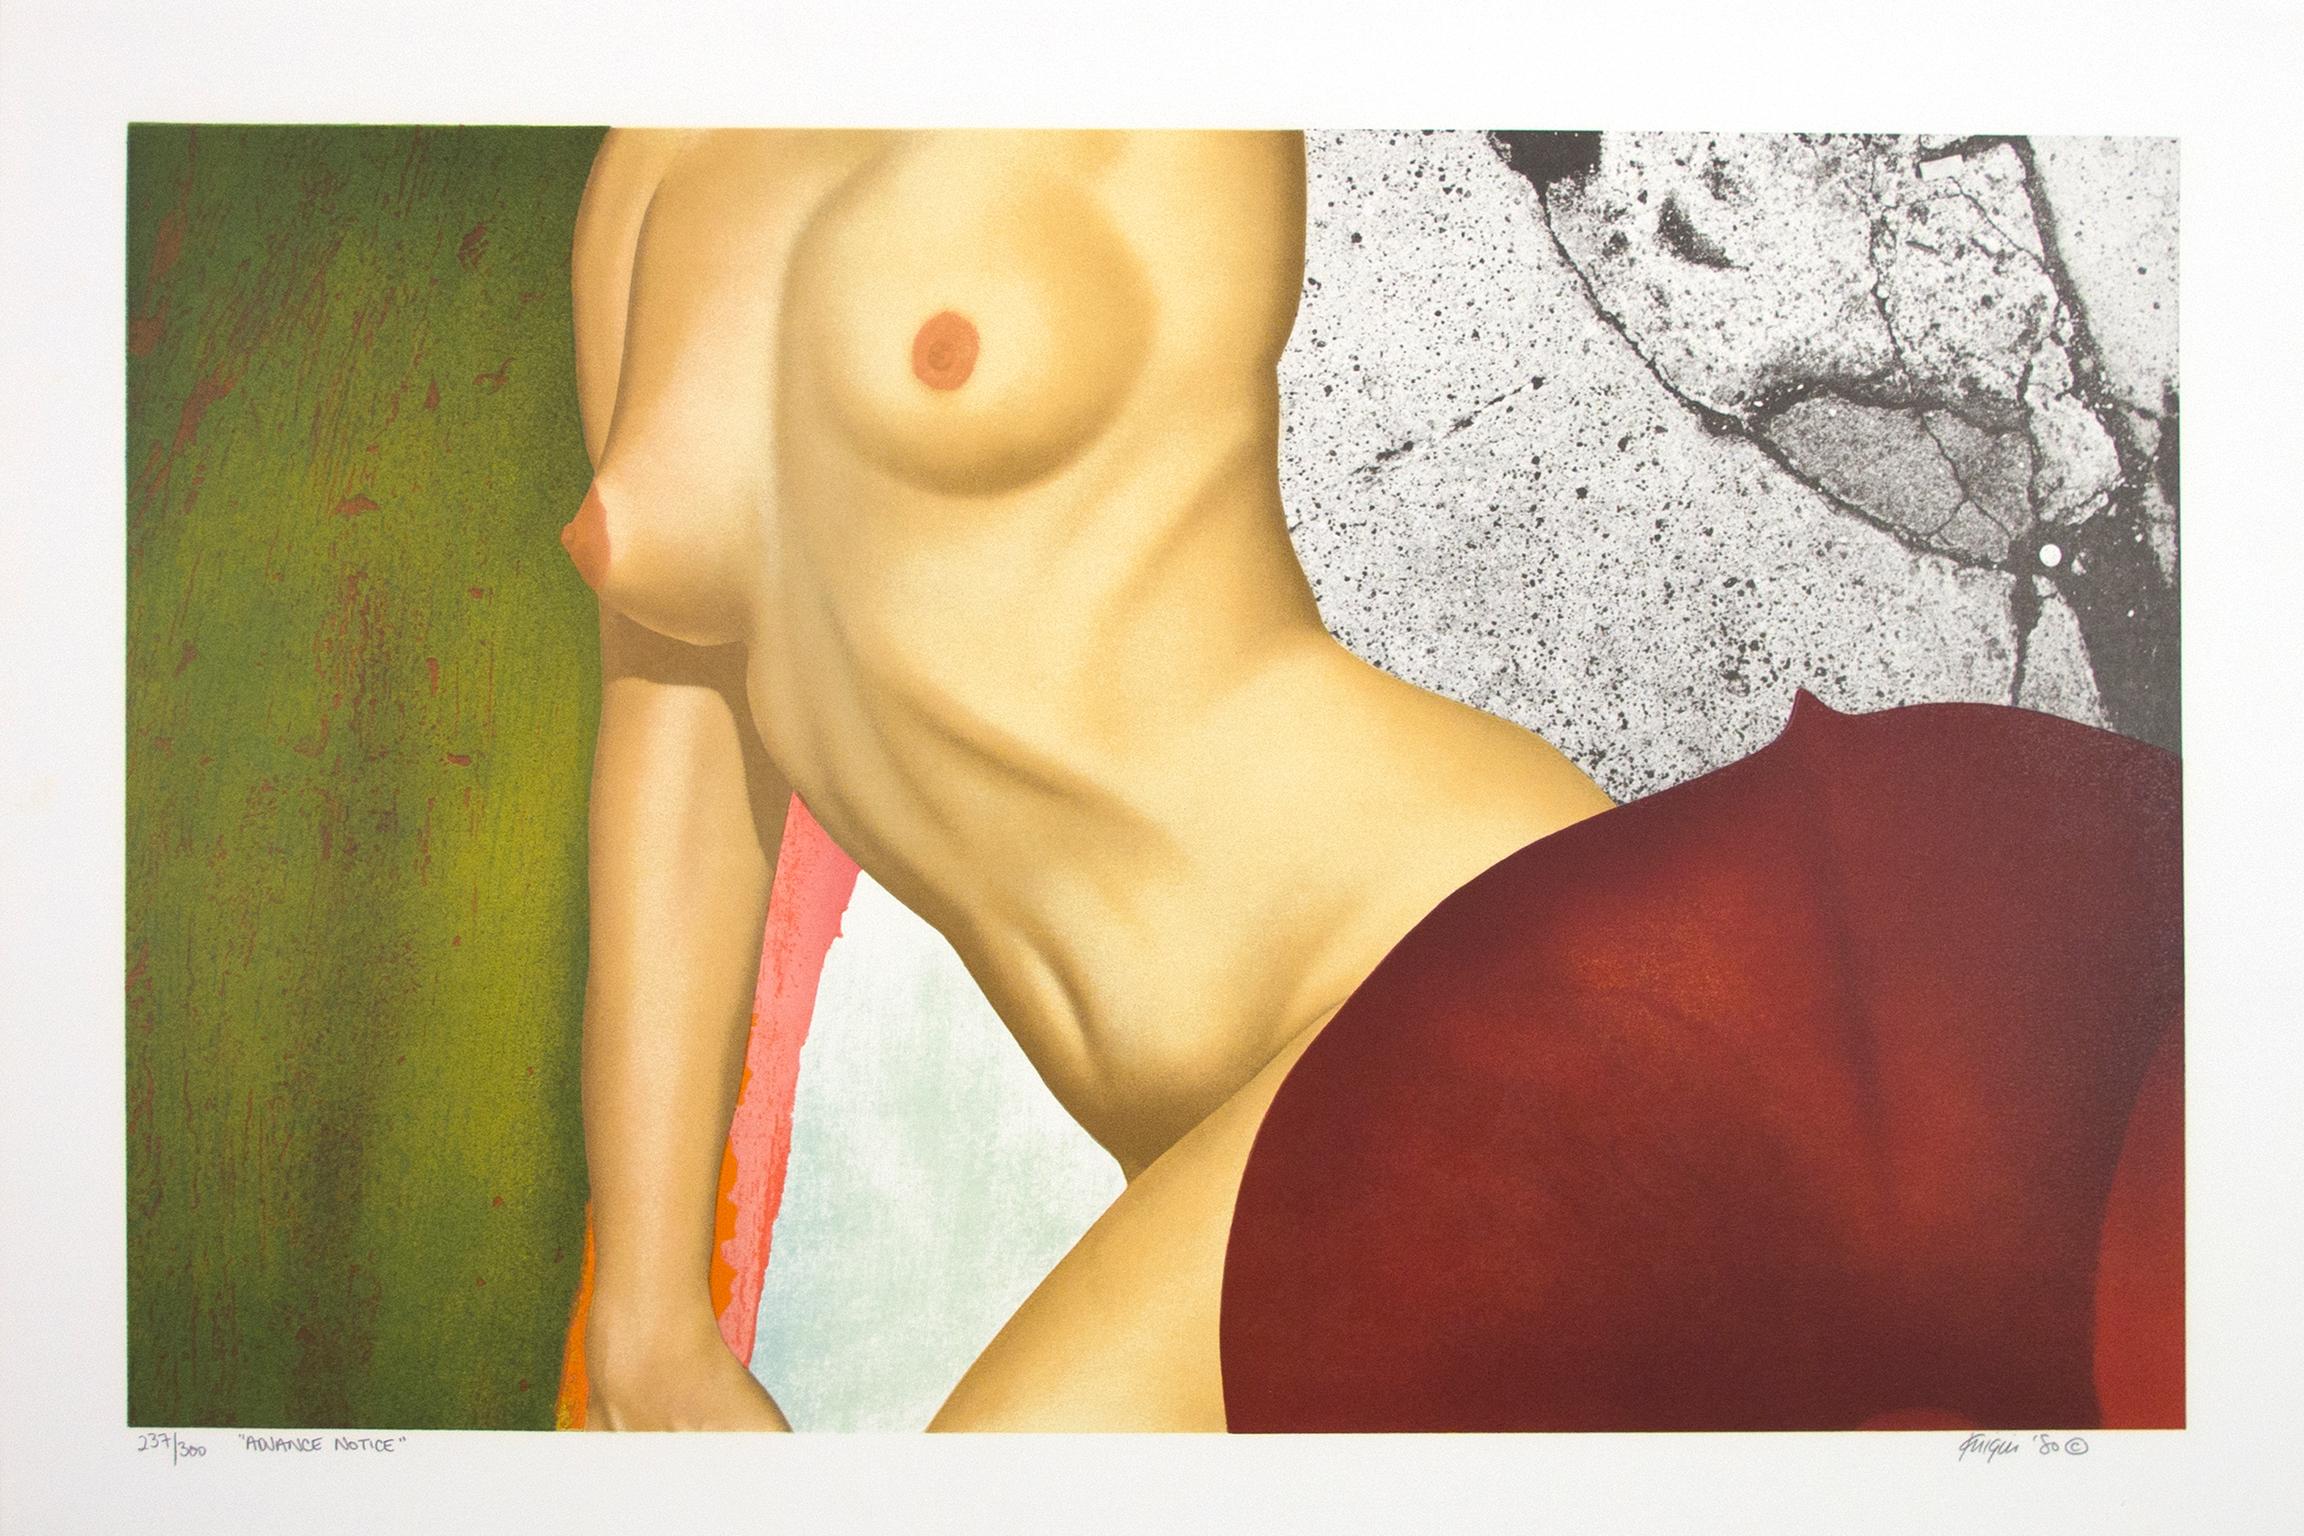 "Advance Notice" is an original color lithograph by Michael Knigin. This artwork feature a nude torso and a close-up of a flower petal. The artist signed the piece lower right and titled and wrote the edition number (237/300) lower left. 

17" x 26